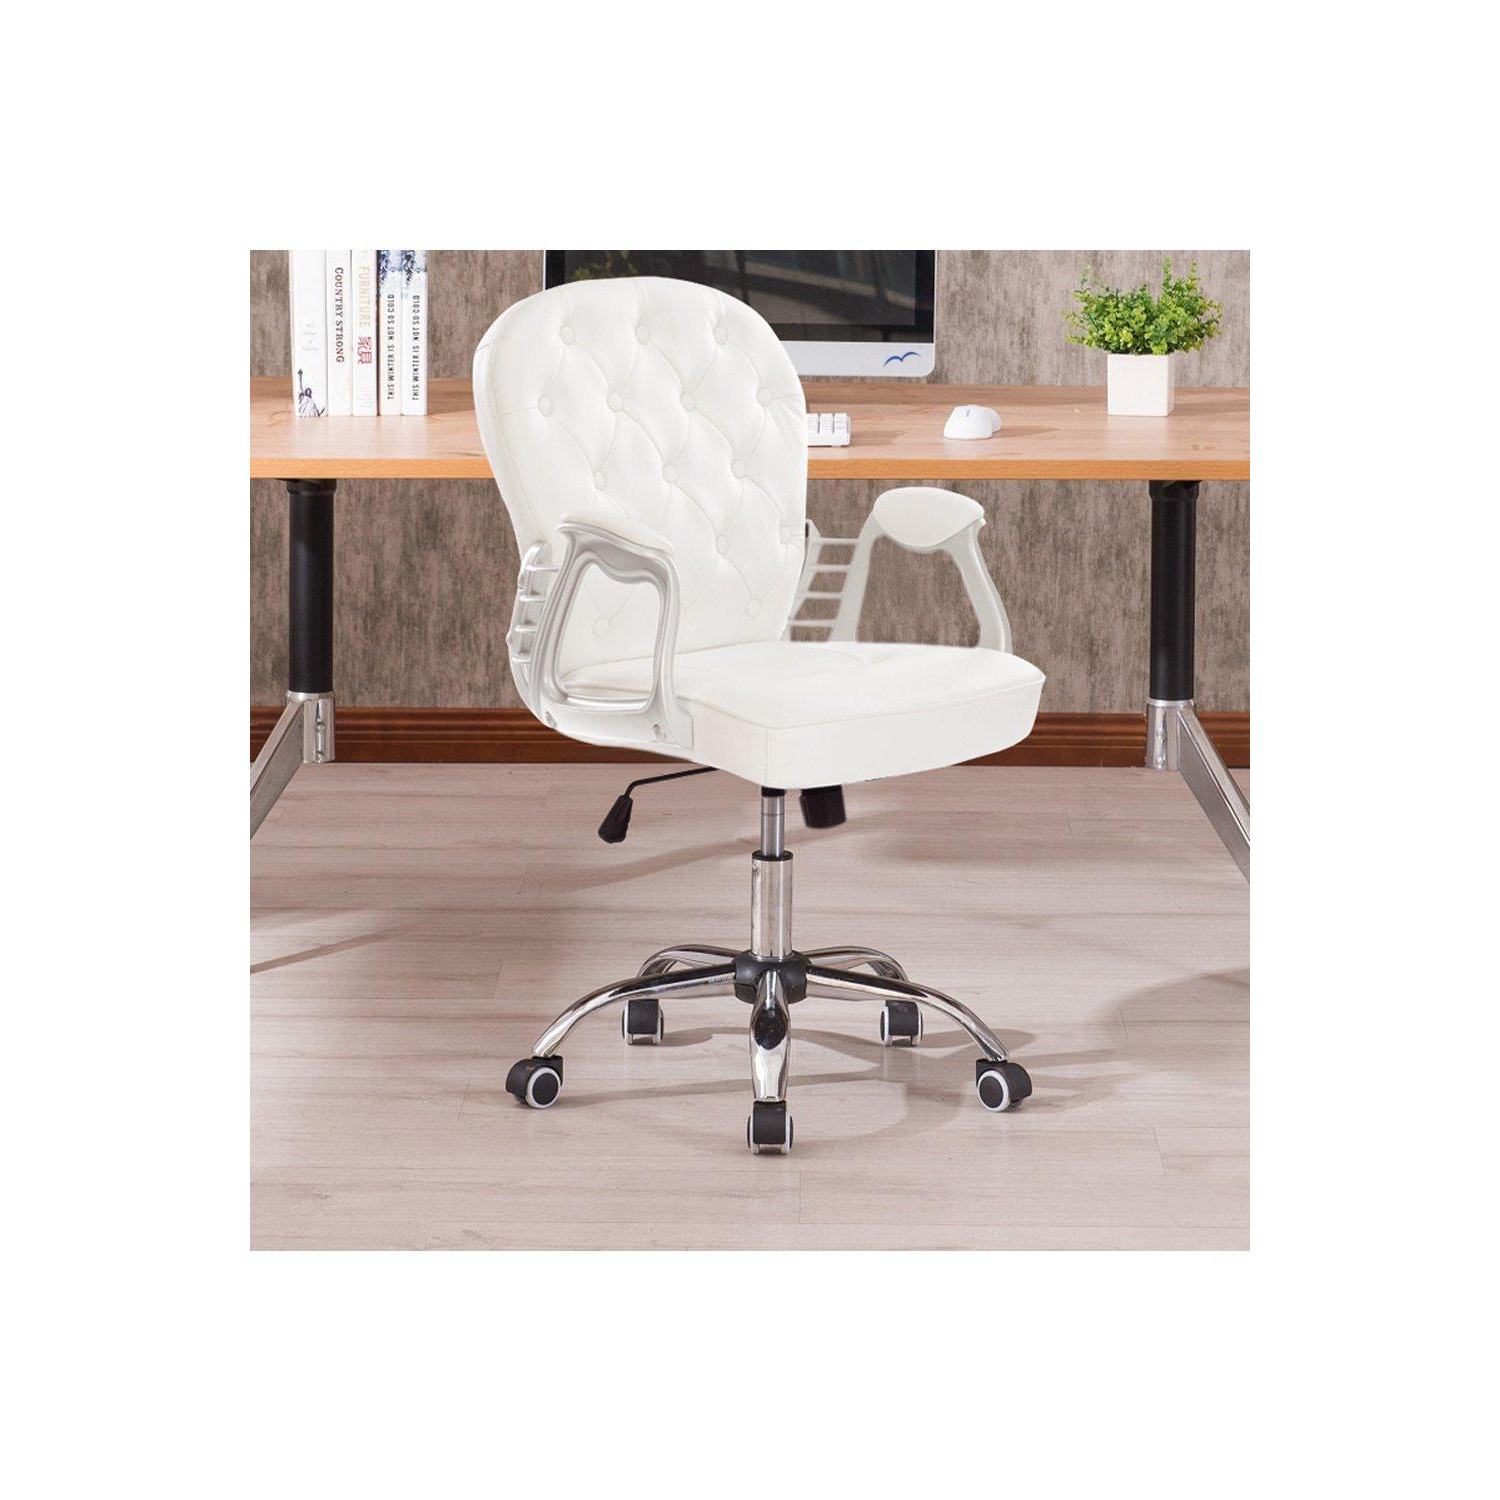 Faux Leather Ergonomic Office Chair with Wheels - image 1